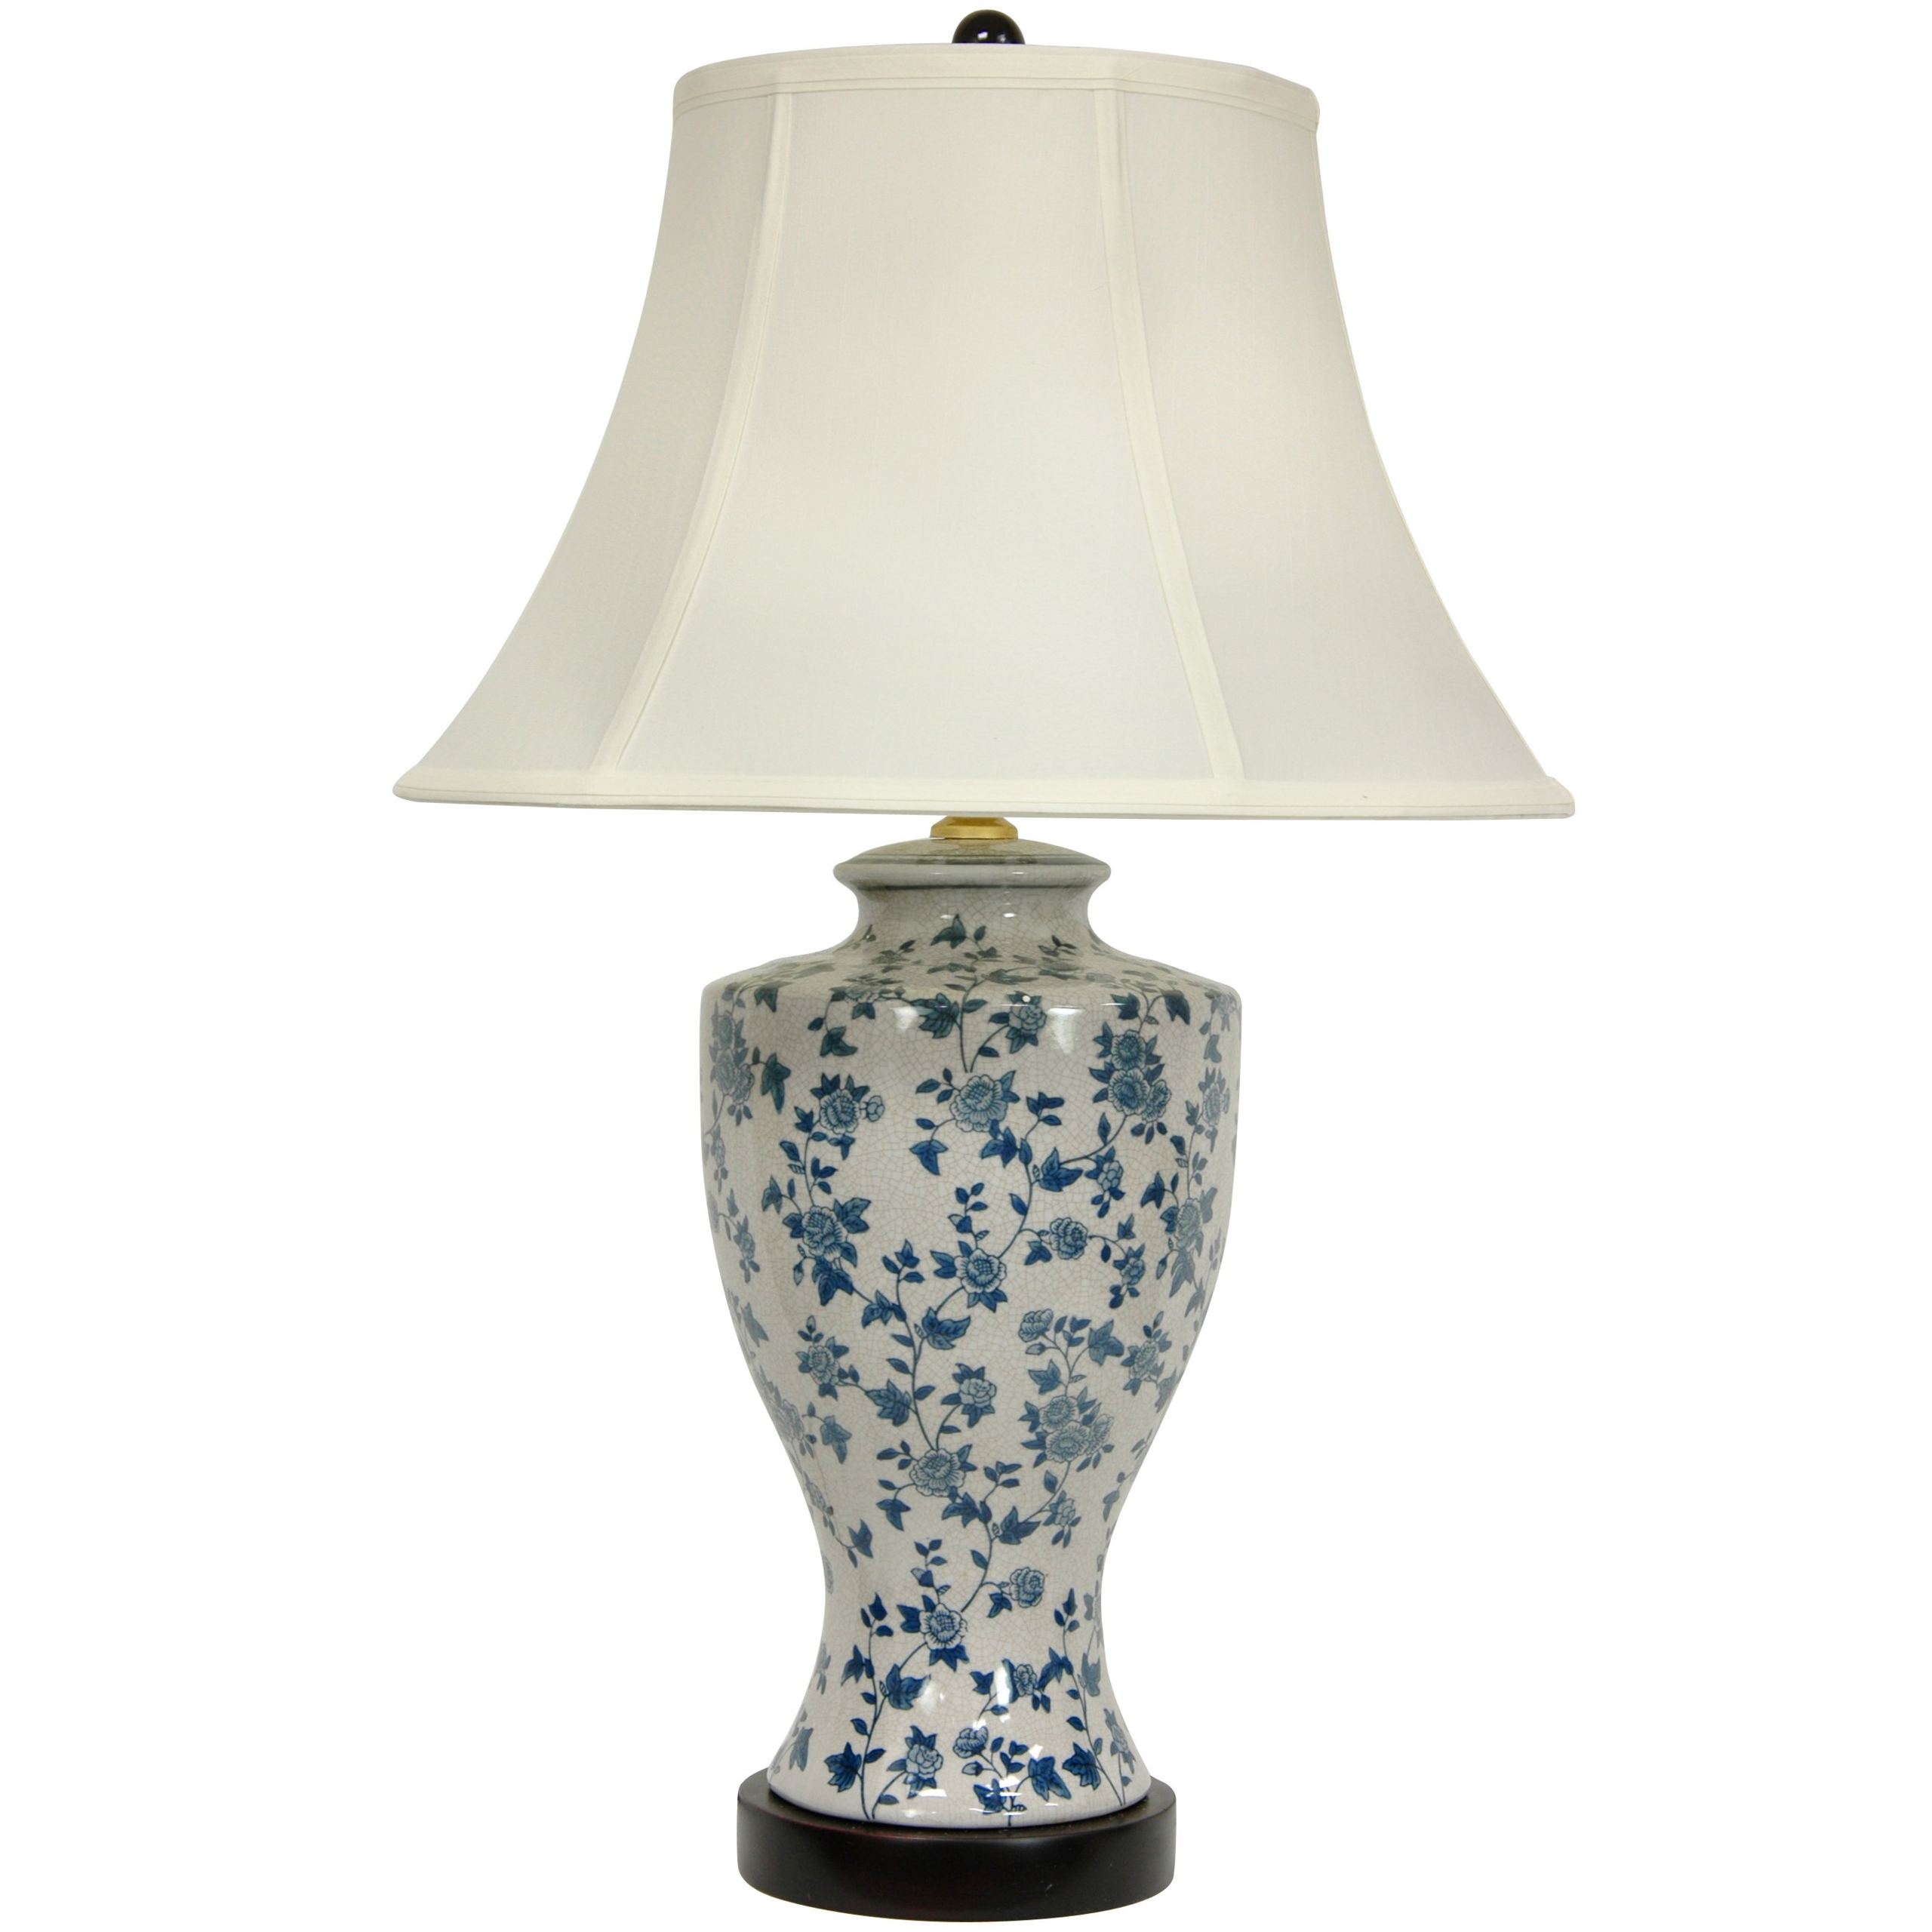 Flower Vine 27" H Table Lamp with Bell Shade